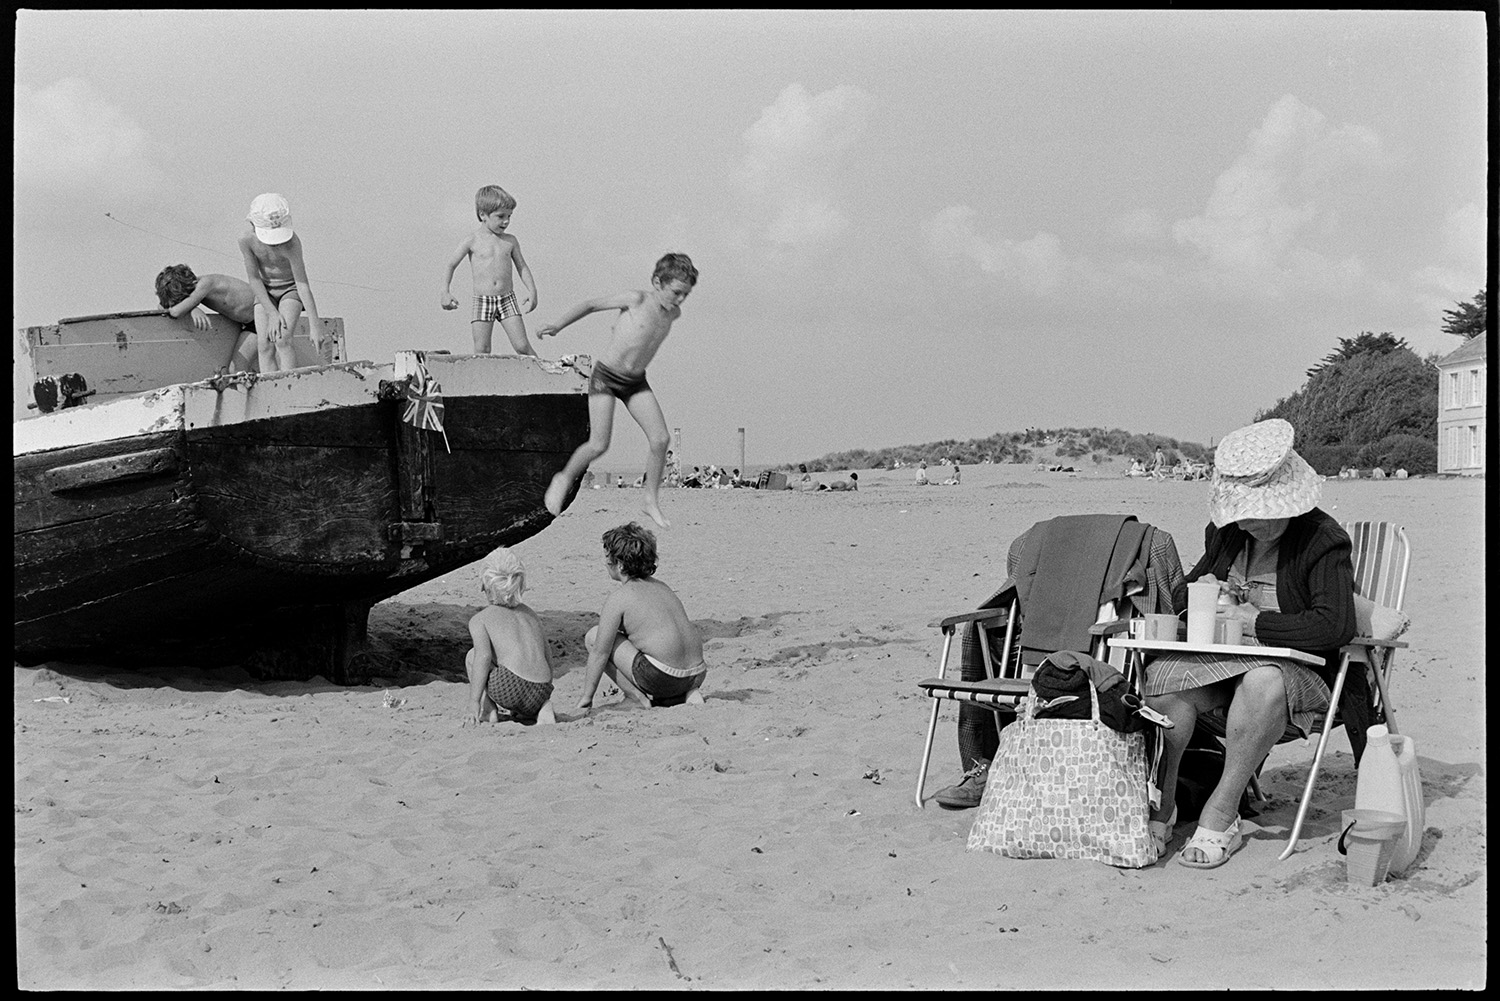 Beach with children playing on beached barge. 
[A woman sat on a garden chair at Instow beach. She is making drinks on a tray on her lap. Six children are playing on a beached barge on the sand nearby.]